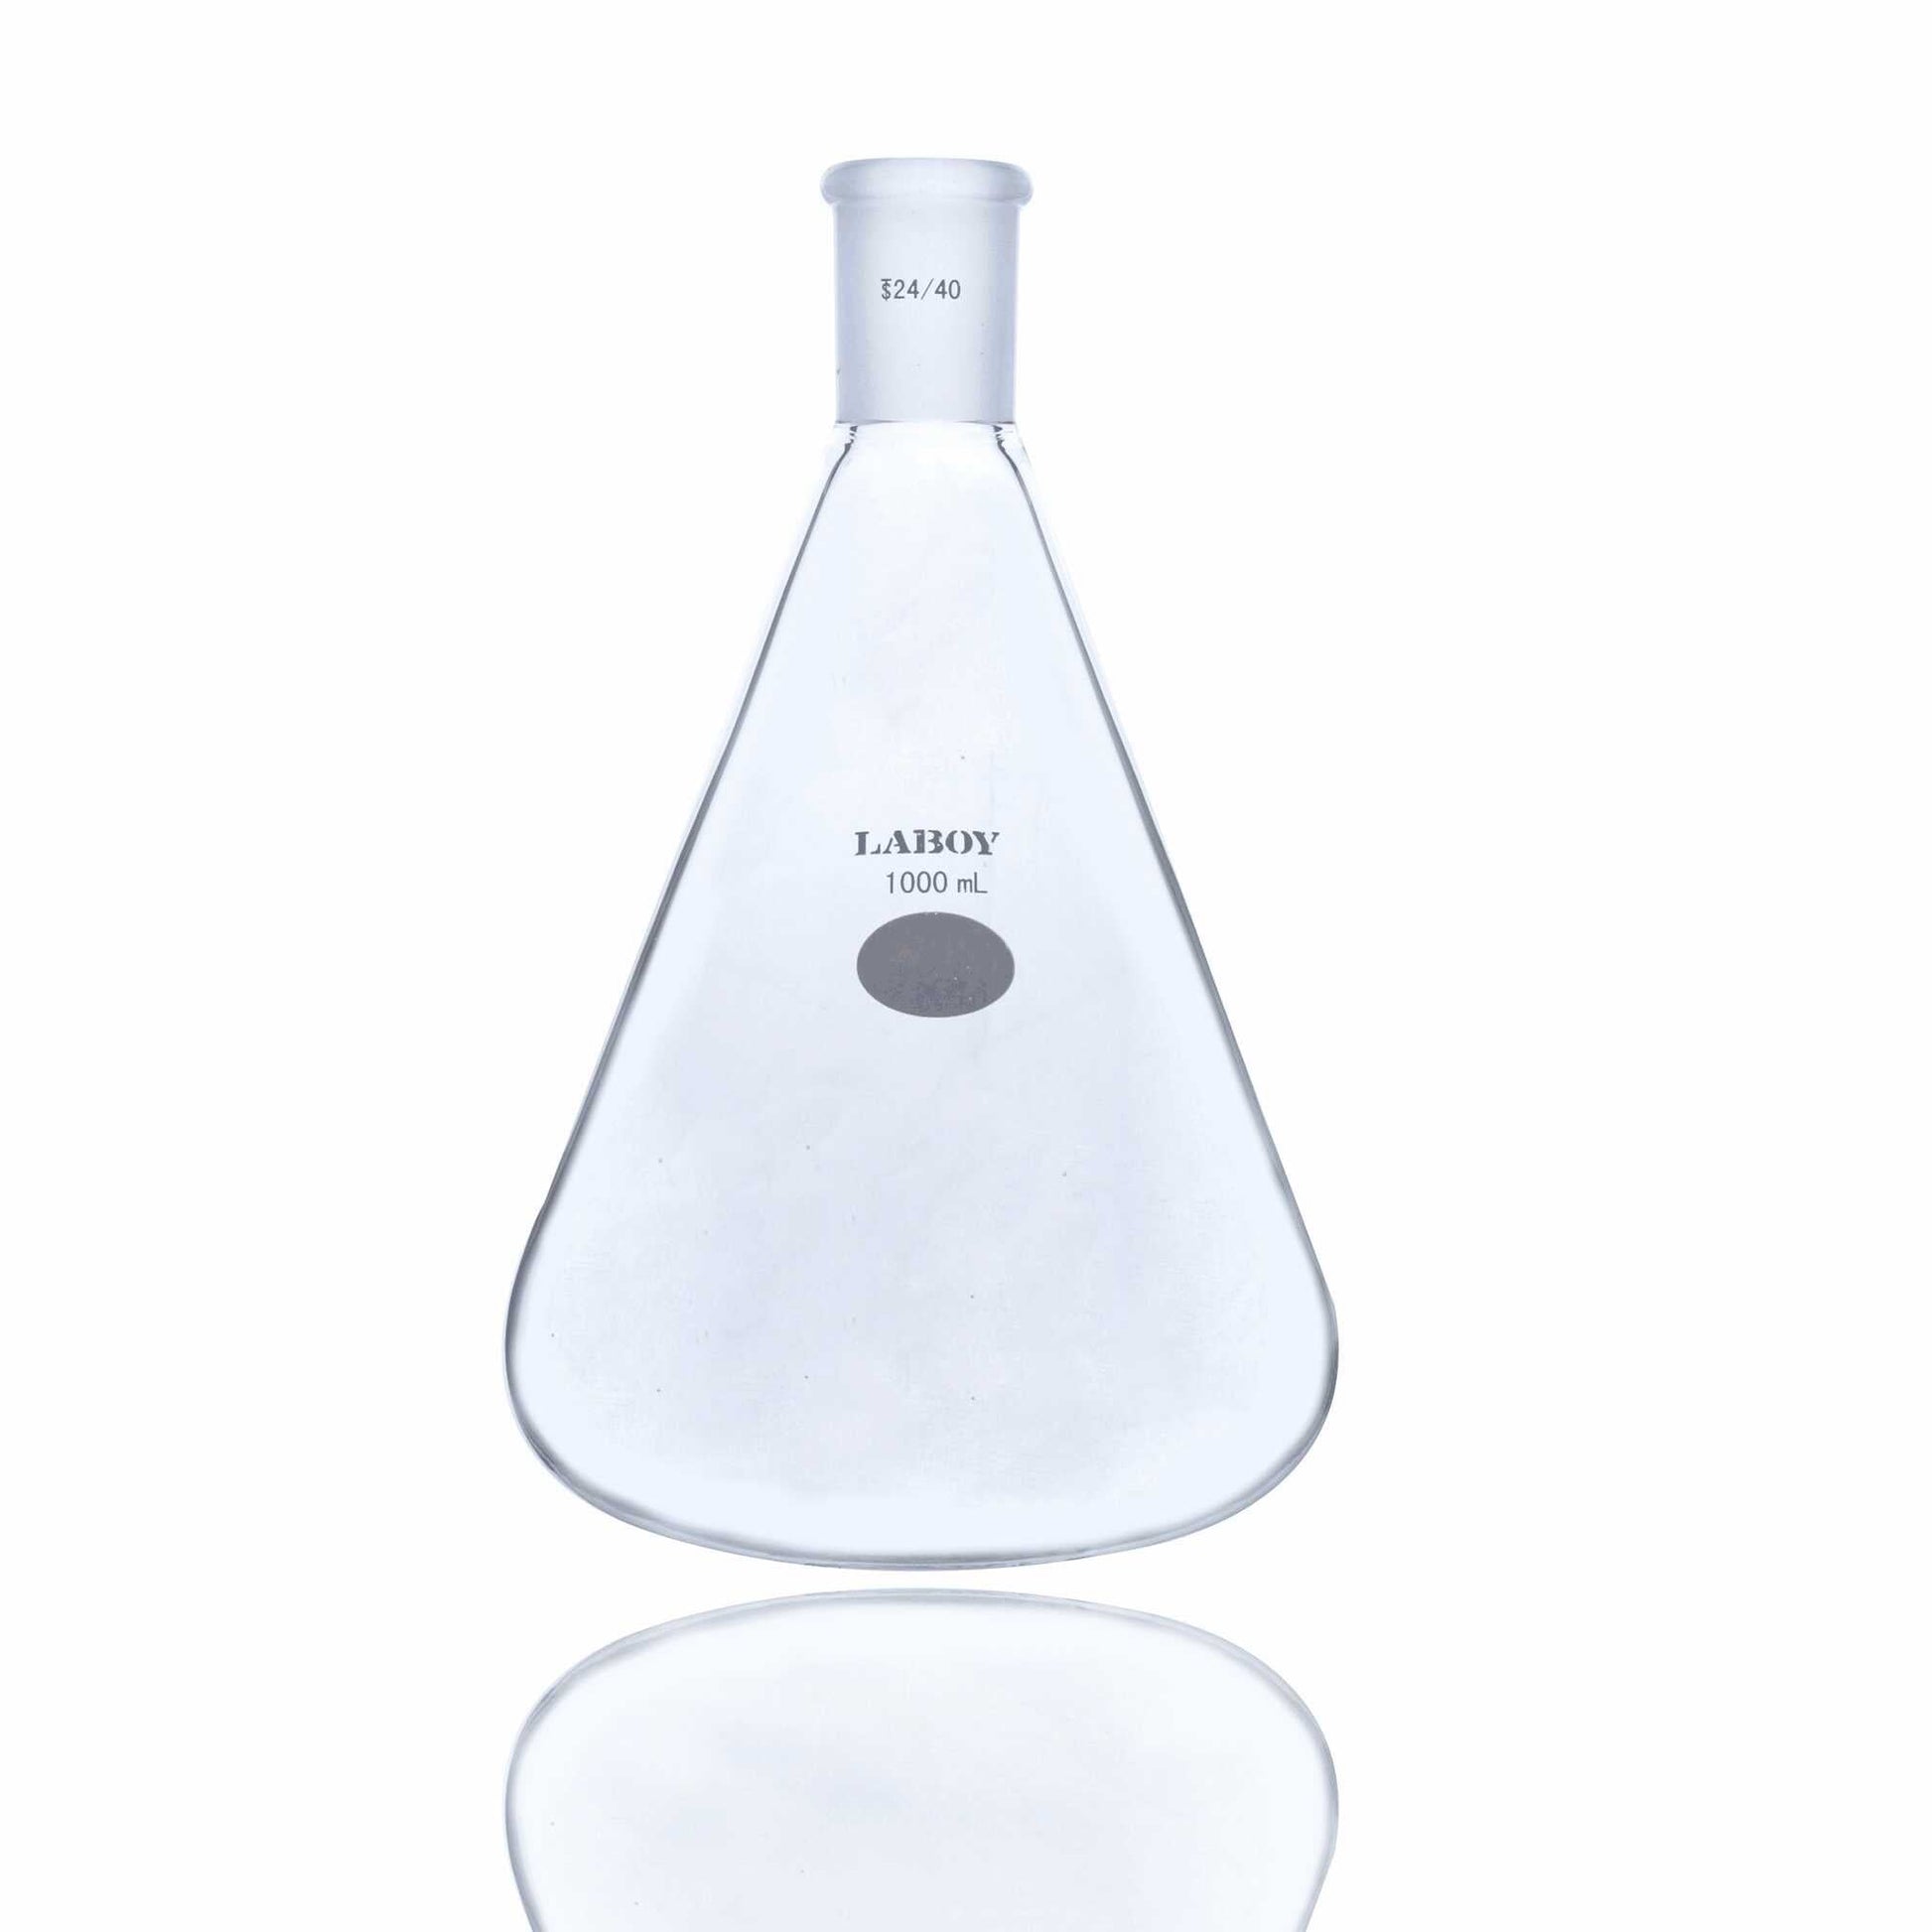 Erlenmeyer Flask Capacity Of 1000mL With 24/40 Outer Joint